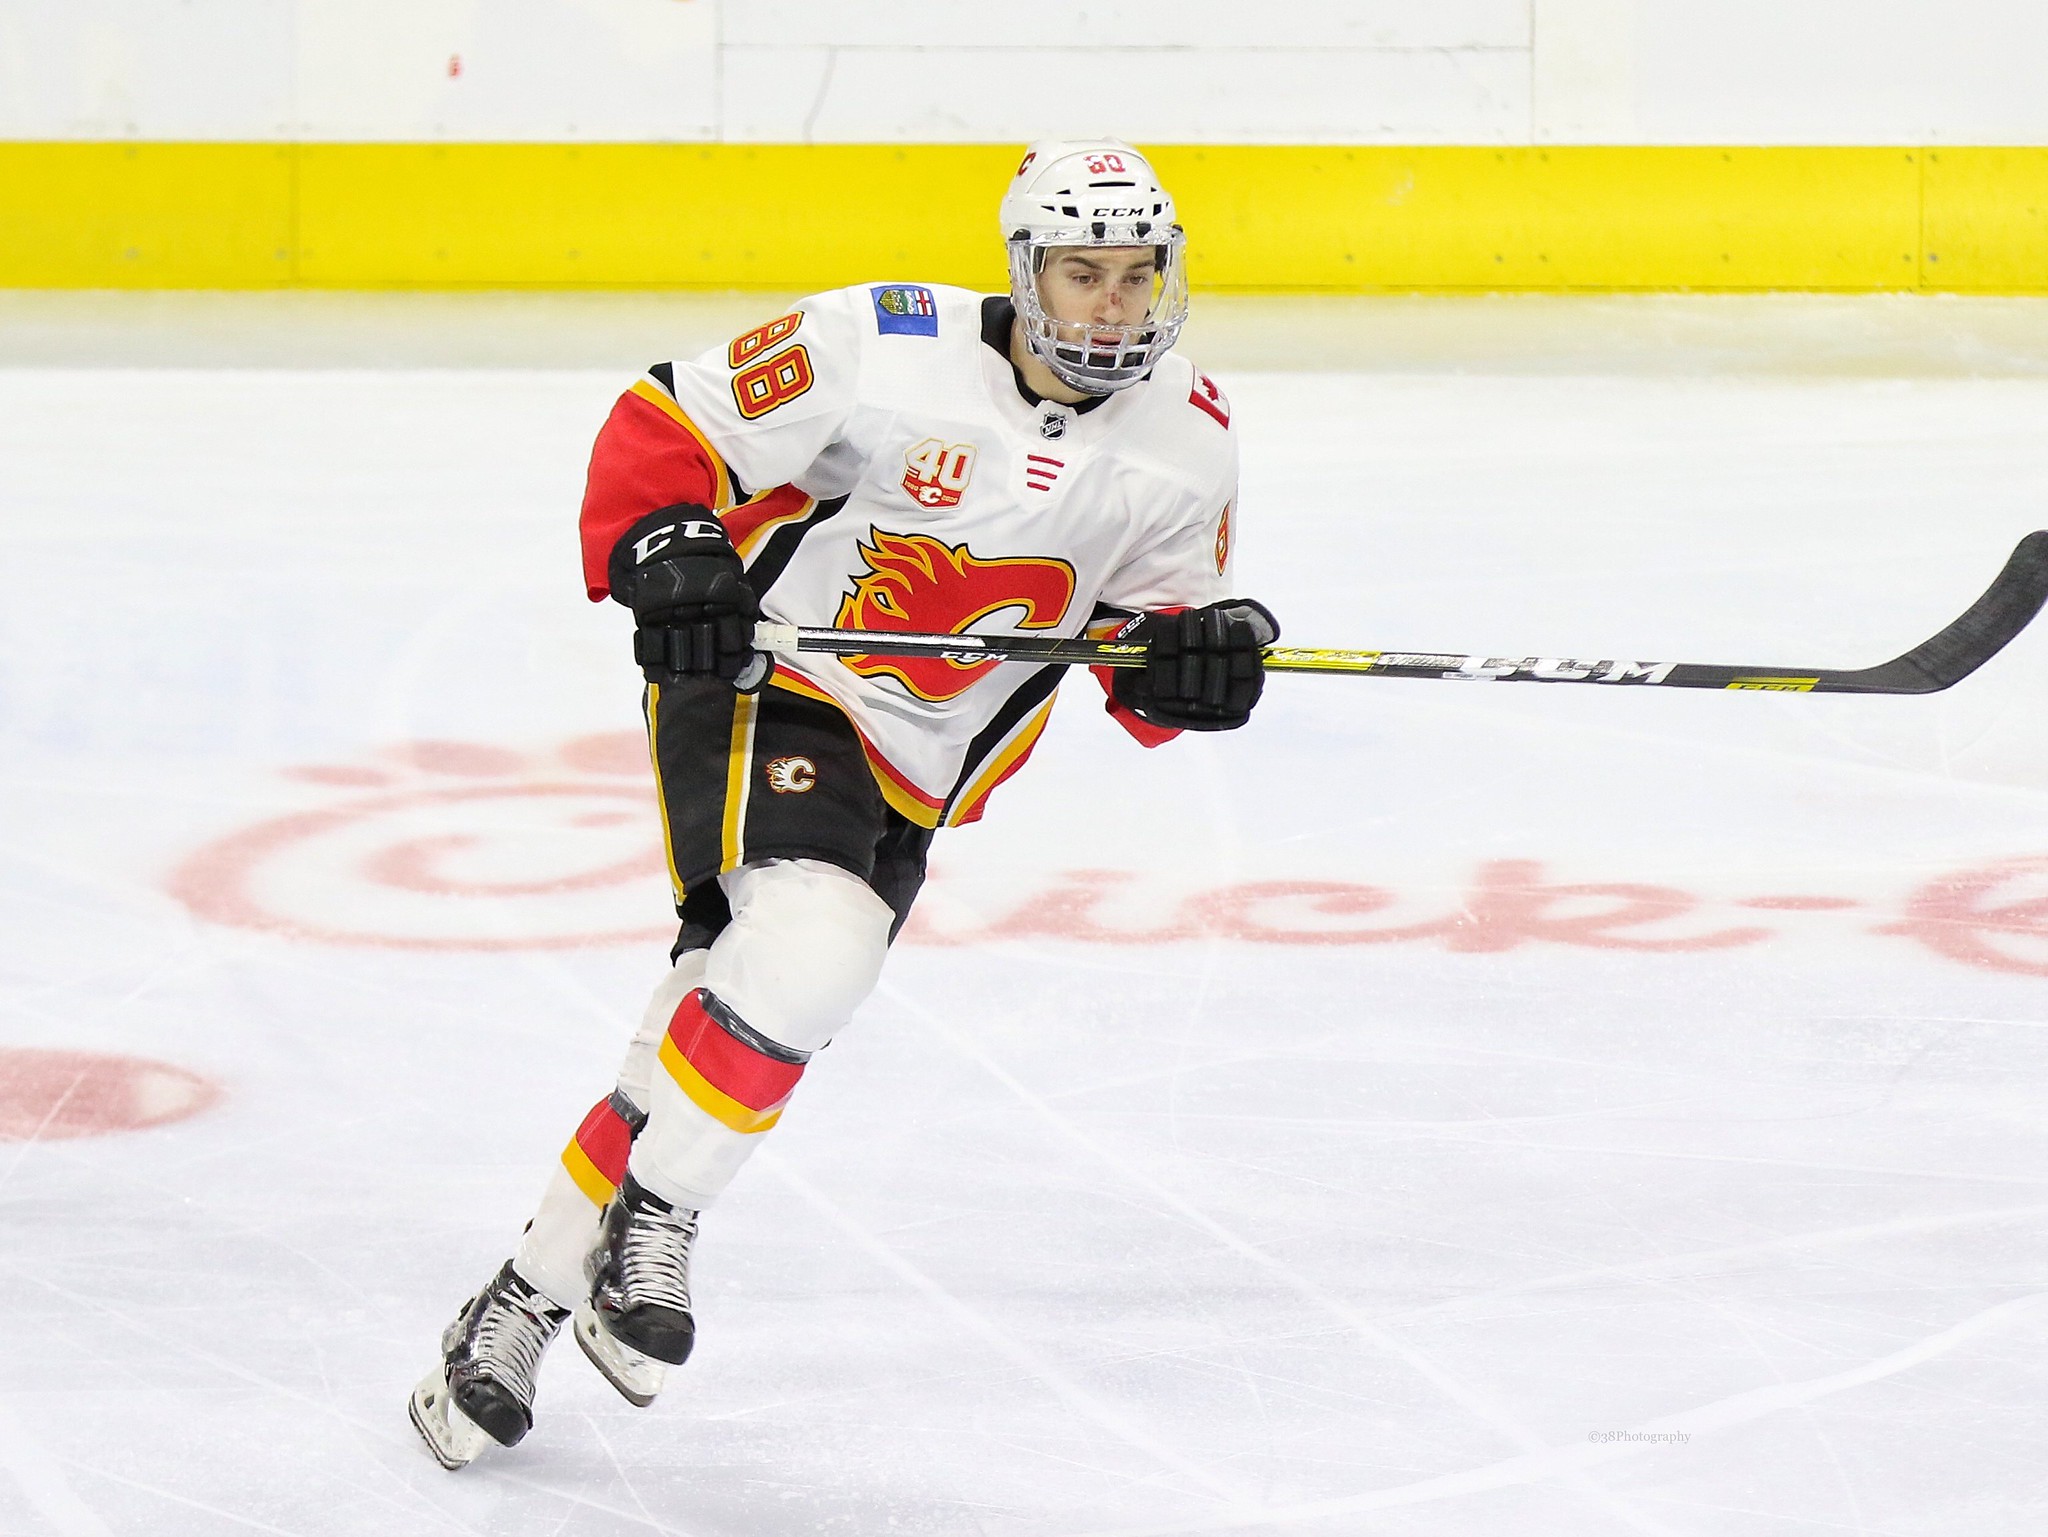 Calgary Flames' Andrew Mangiapane plays during an NHL hockey game